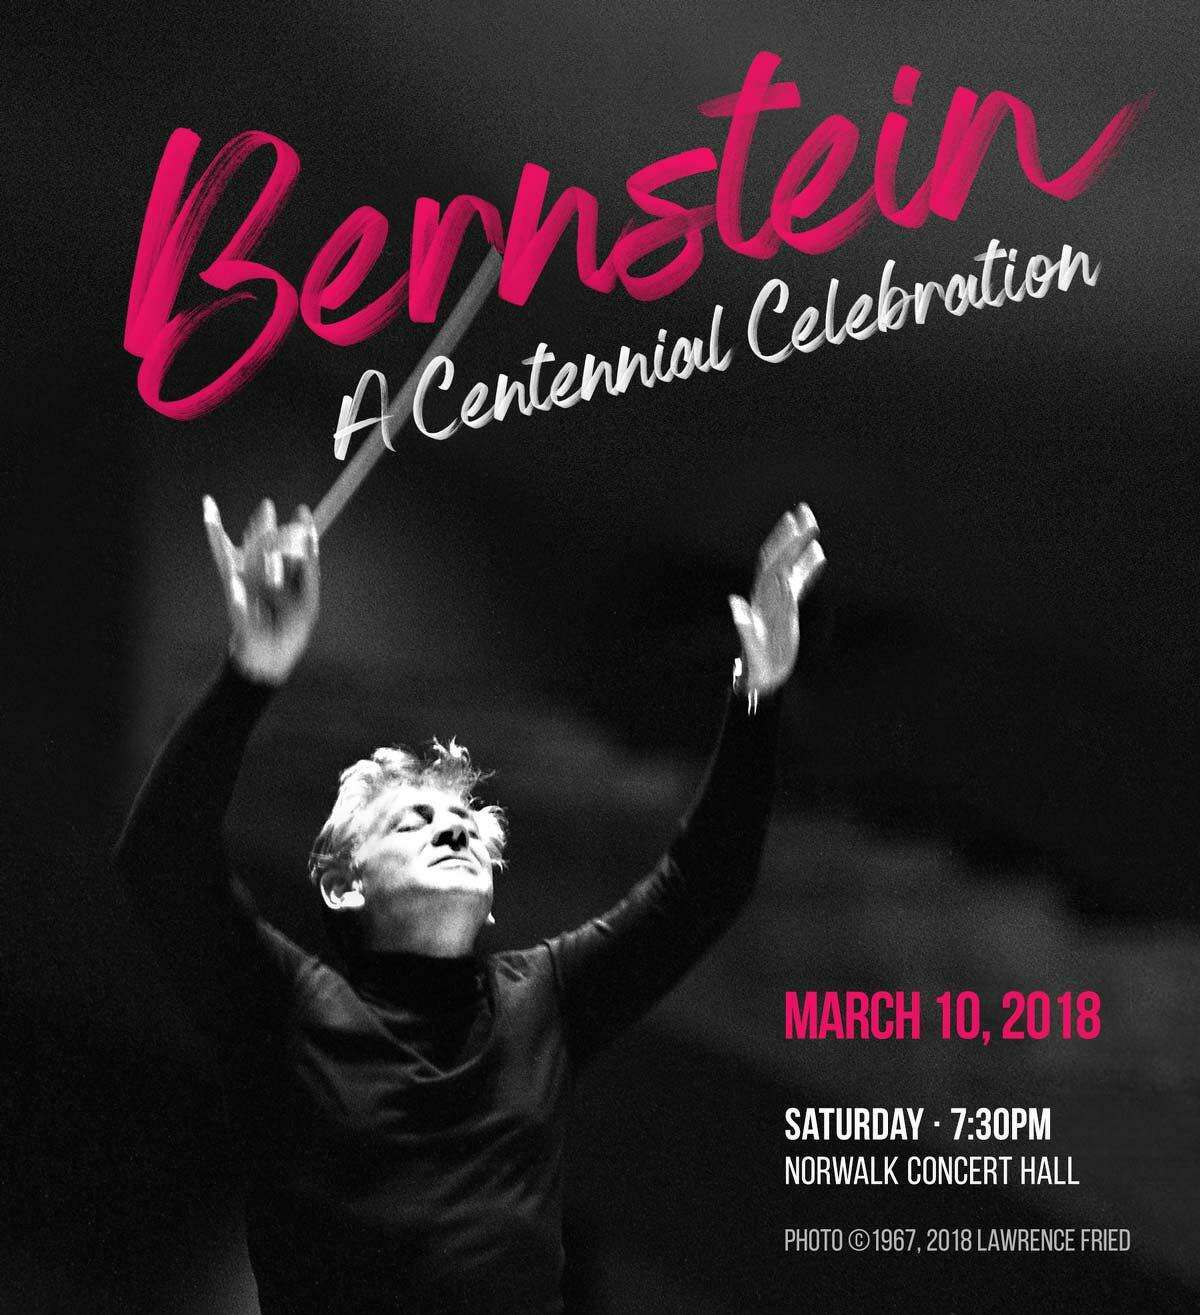 “Bernstein: A Centennial Celebration,” presented by the Fairfield County Chorale, takes place March 10 in Norwalk.